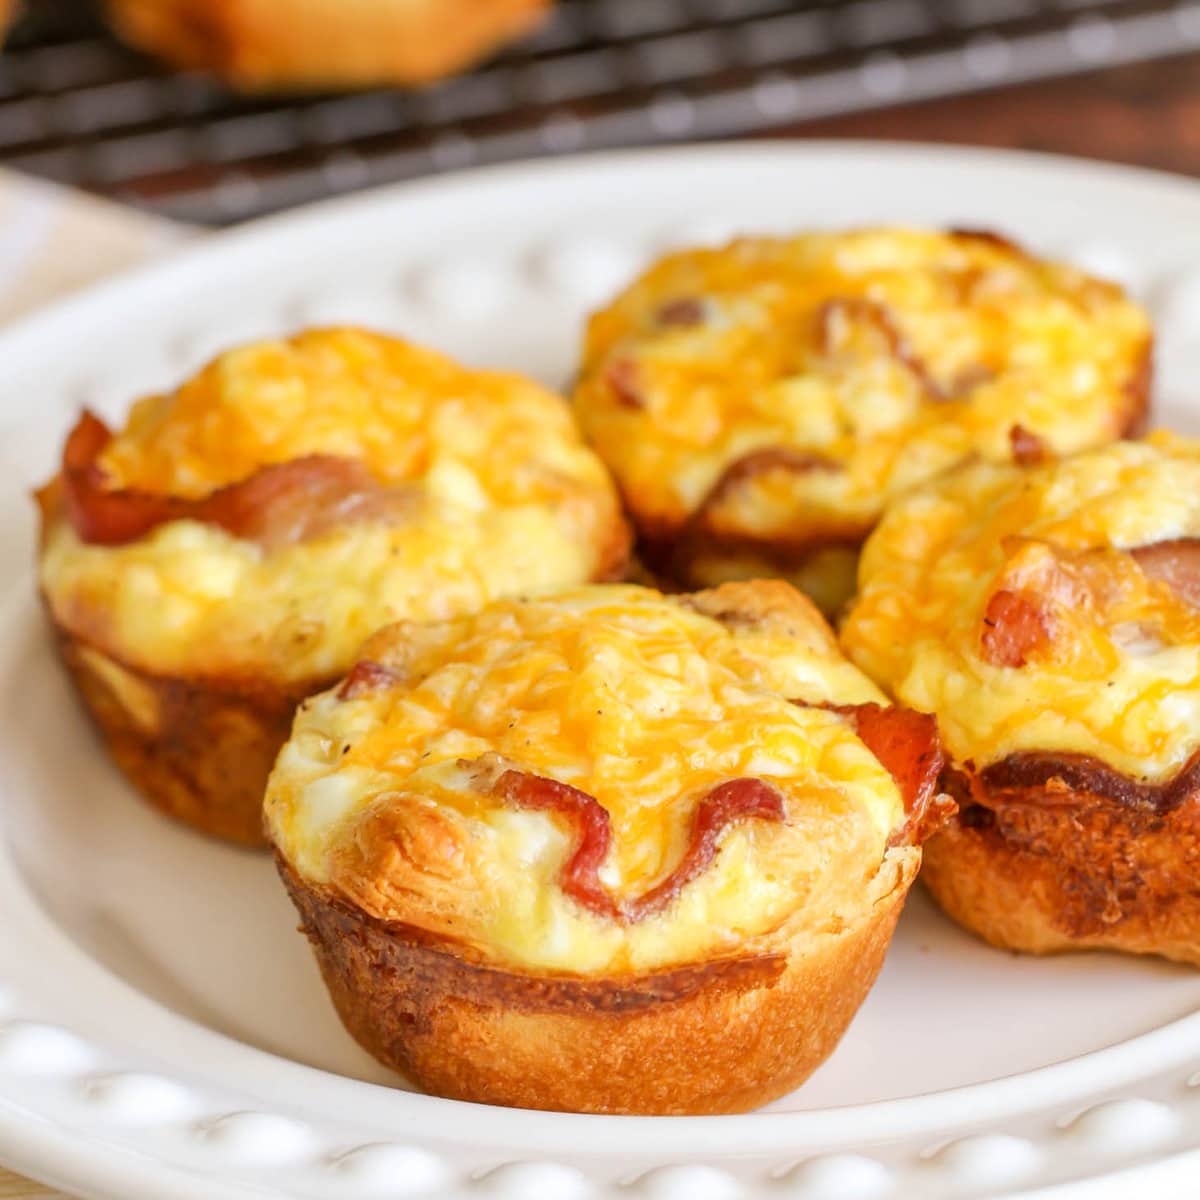 Thanksgiving breakfast ideas - several breakfast egg cups served on a white plate.